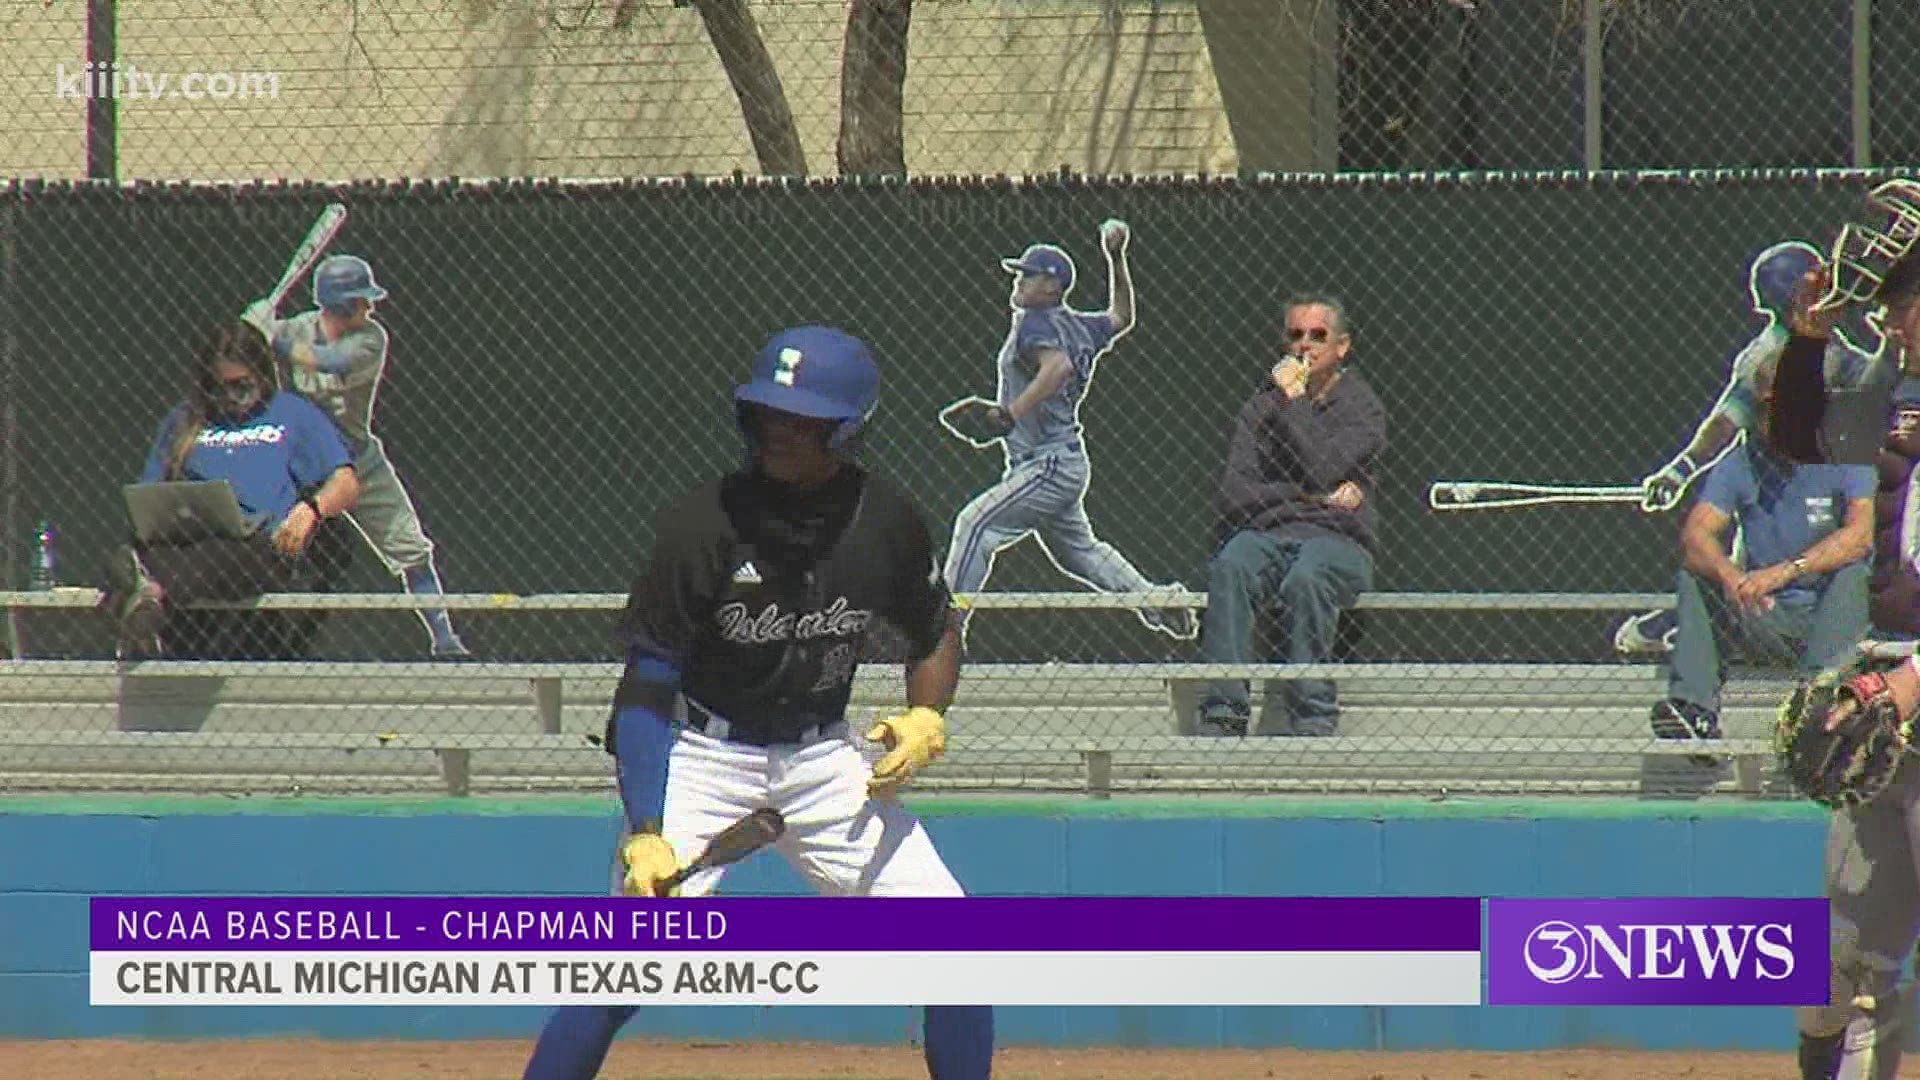 Texas A&M-Corpus Christi gout out to a 4-0 lead and held off a Chippewas rally to win 6-3.